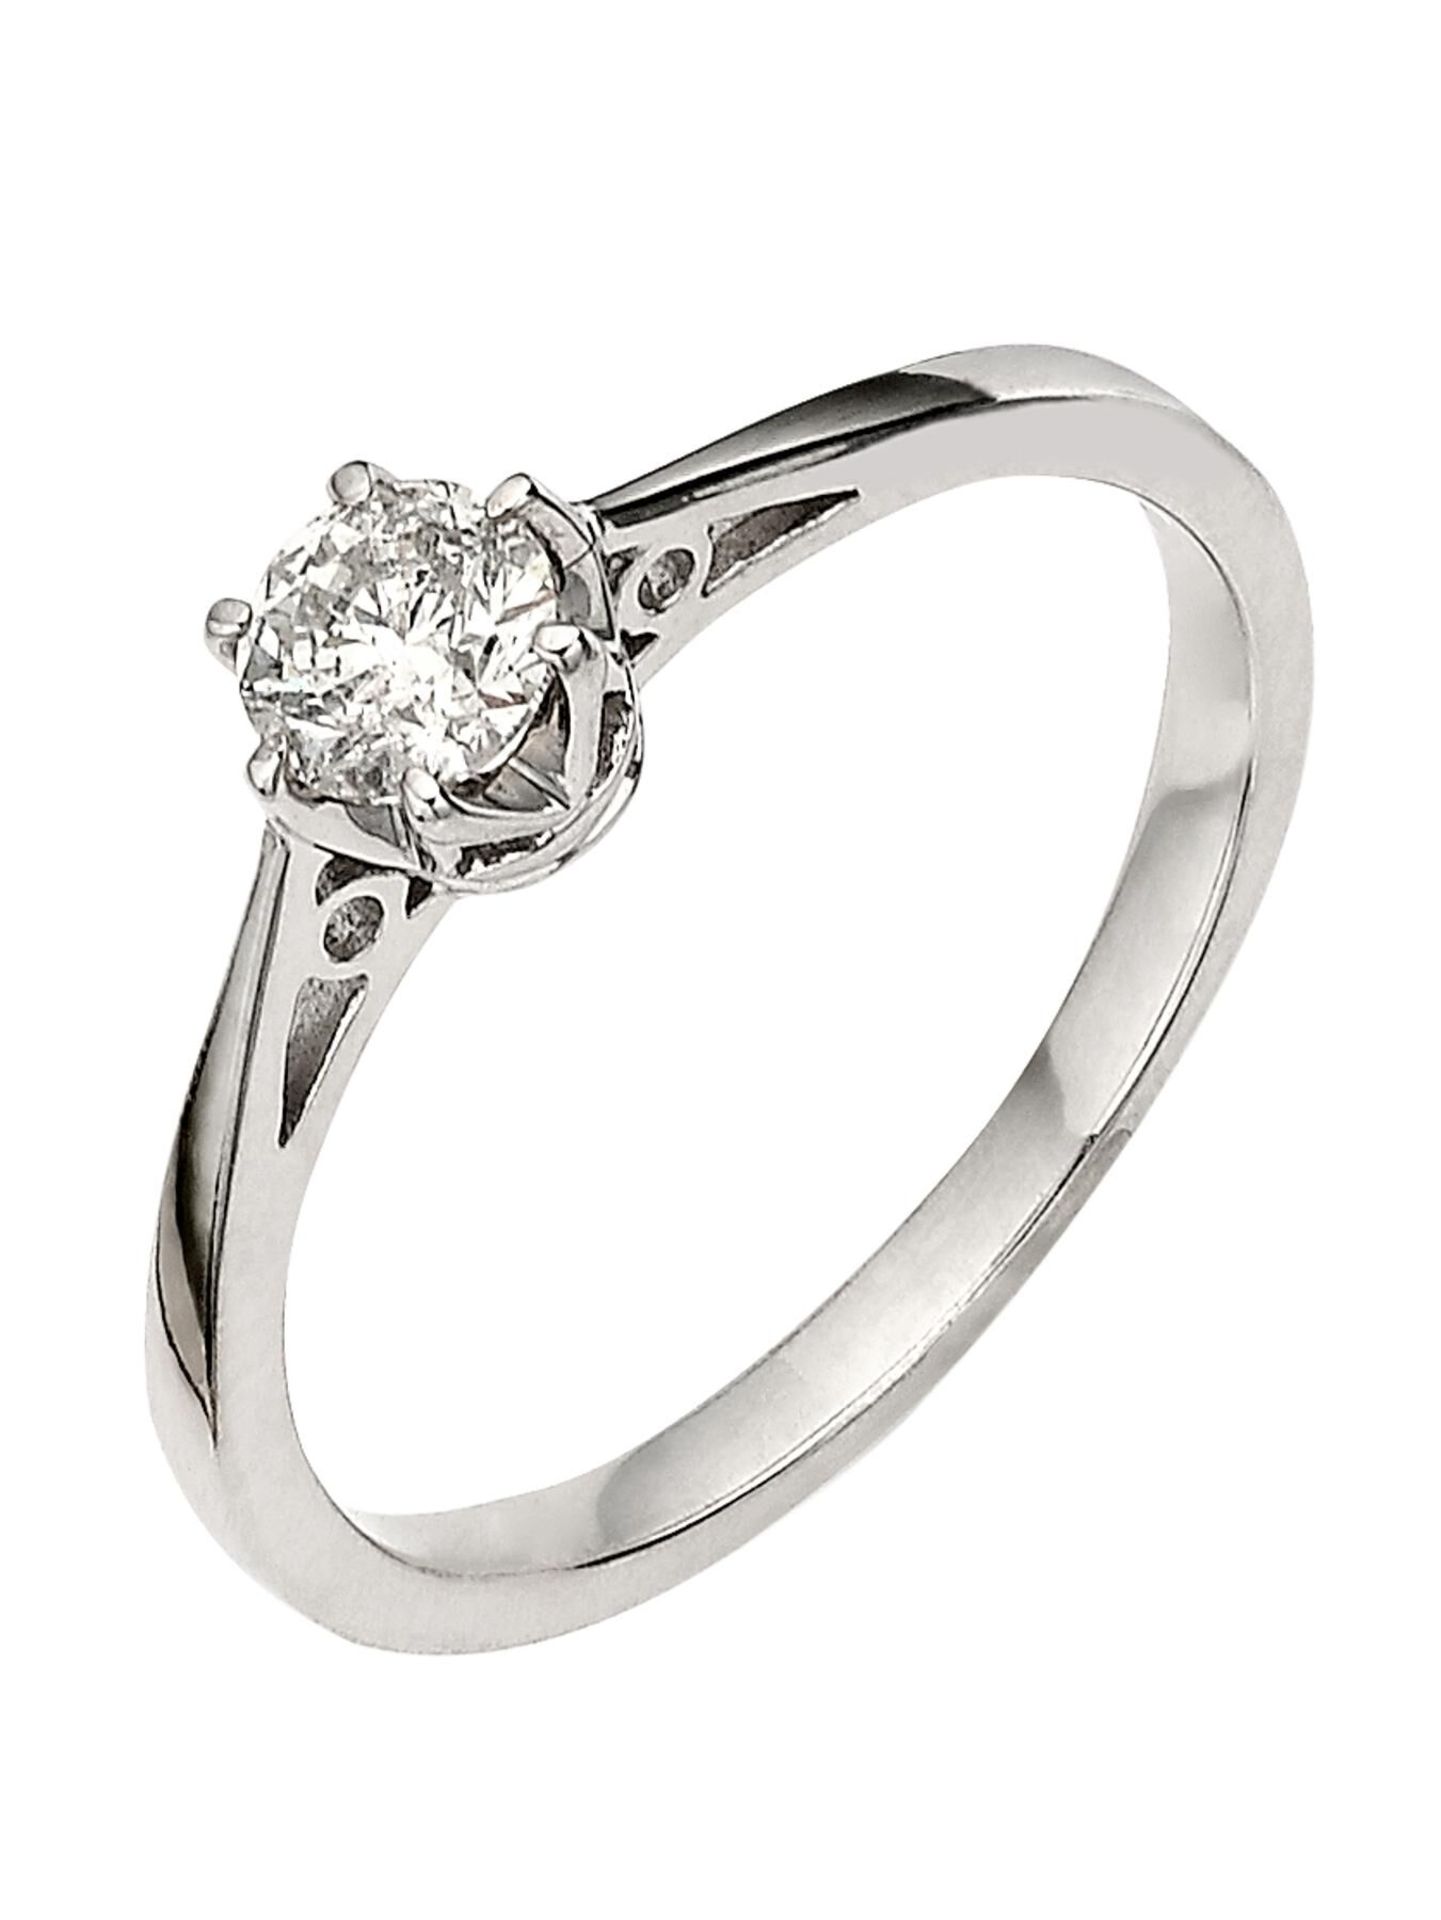 Diamond Solitaire Engagement Ring, 9ct White Gold RRP £649 Weight 2.16g, Diamond Weight 0.16ct,